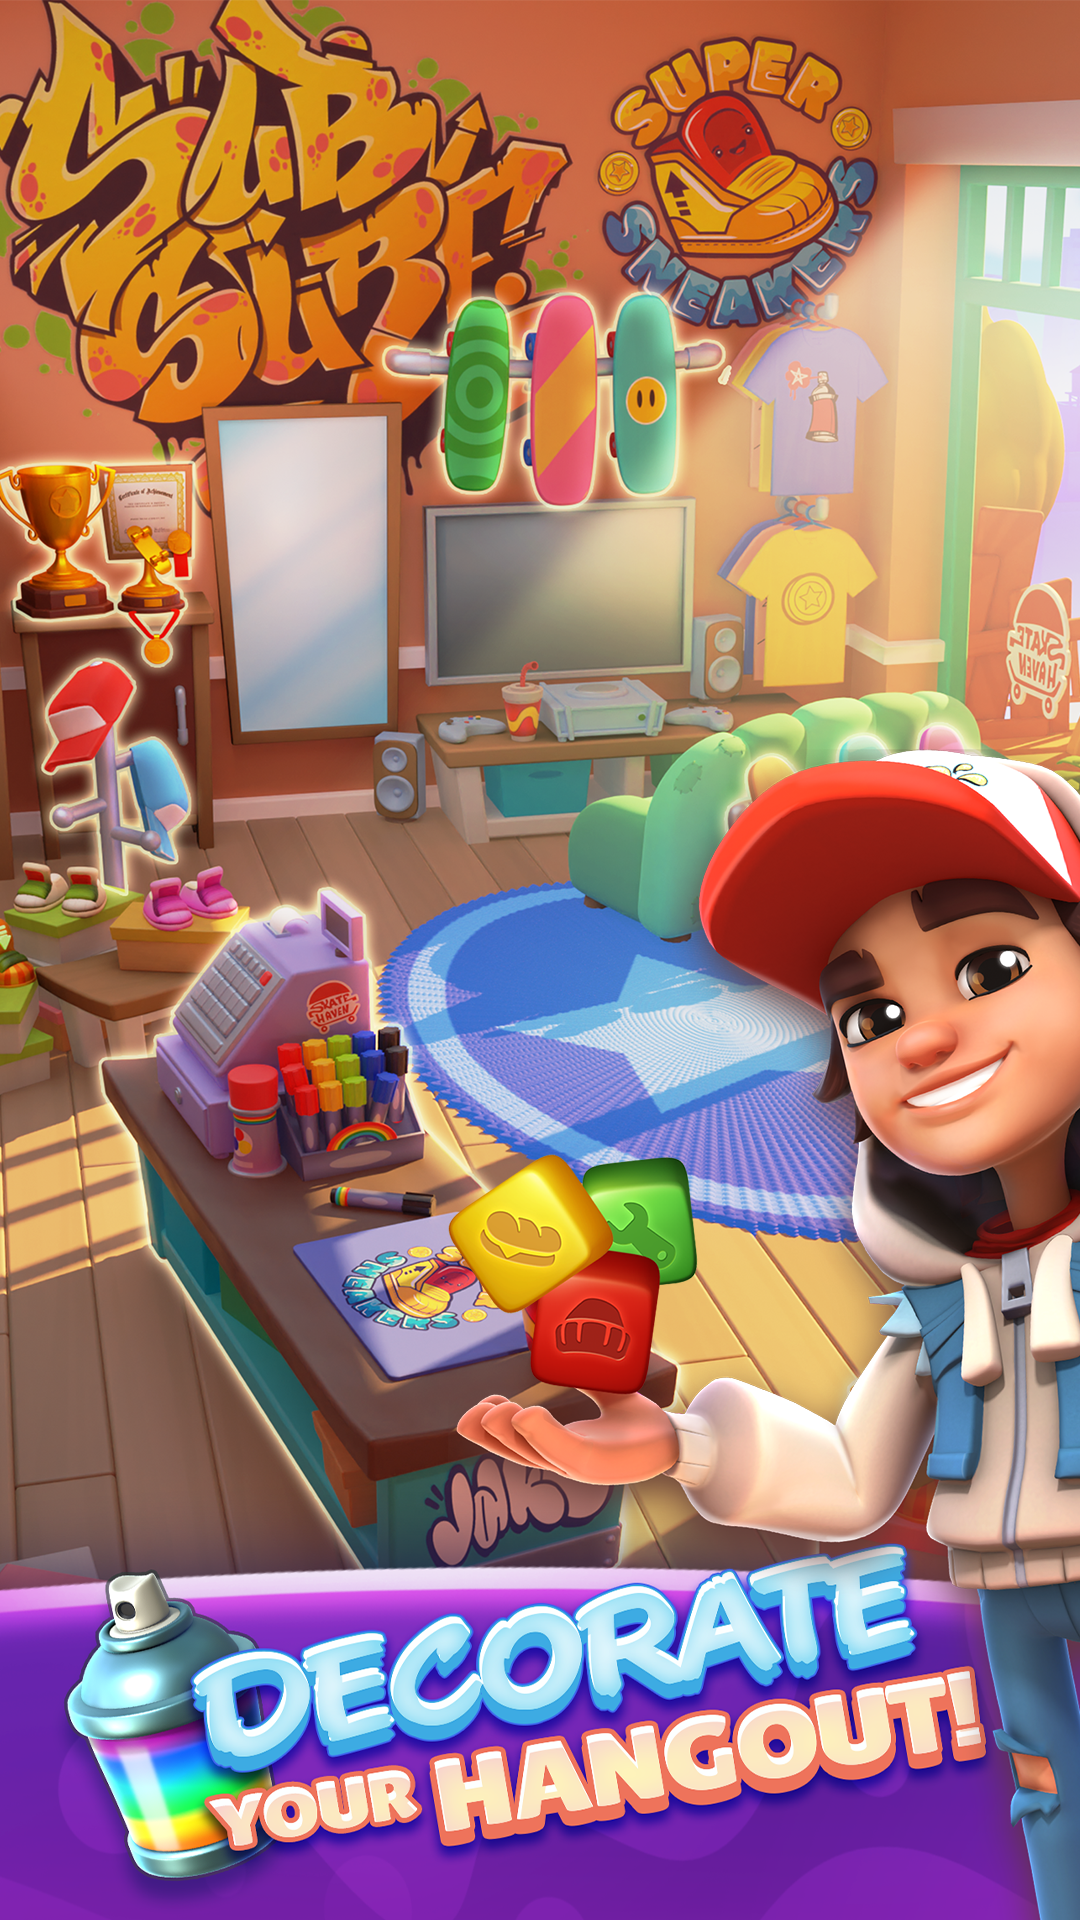 Free download Subway Surfers APK for Android